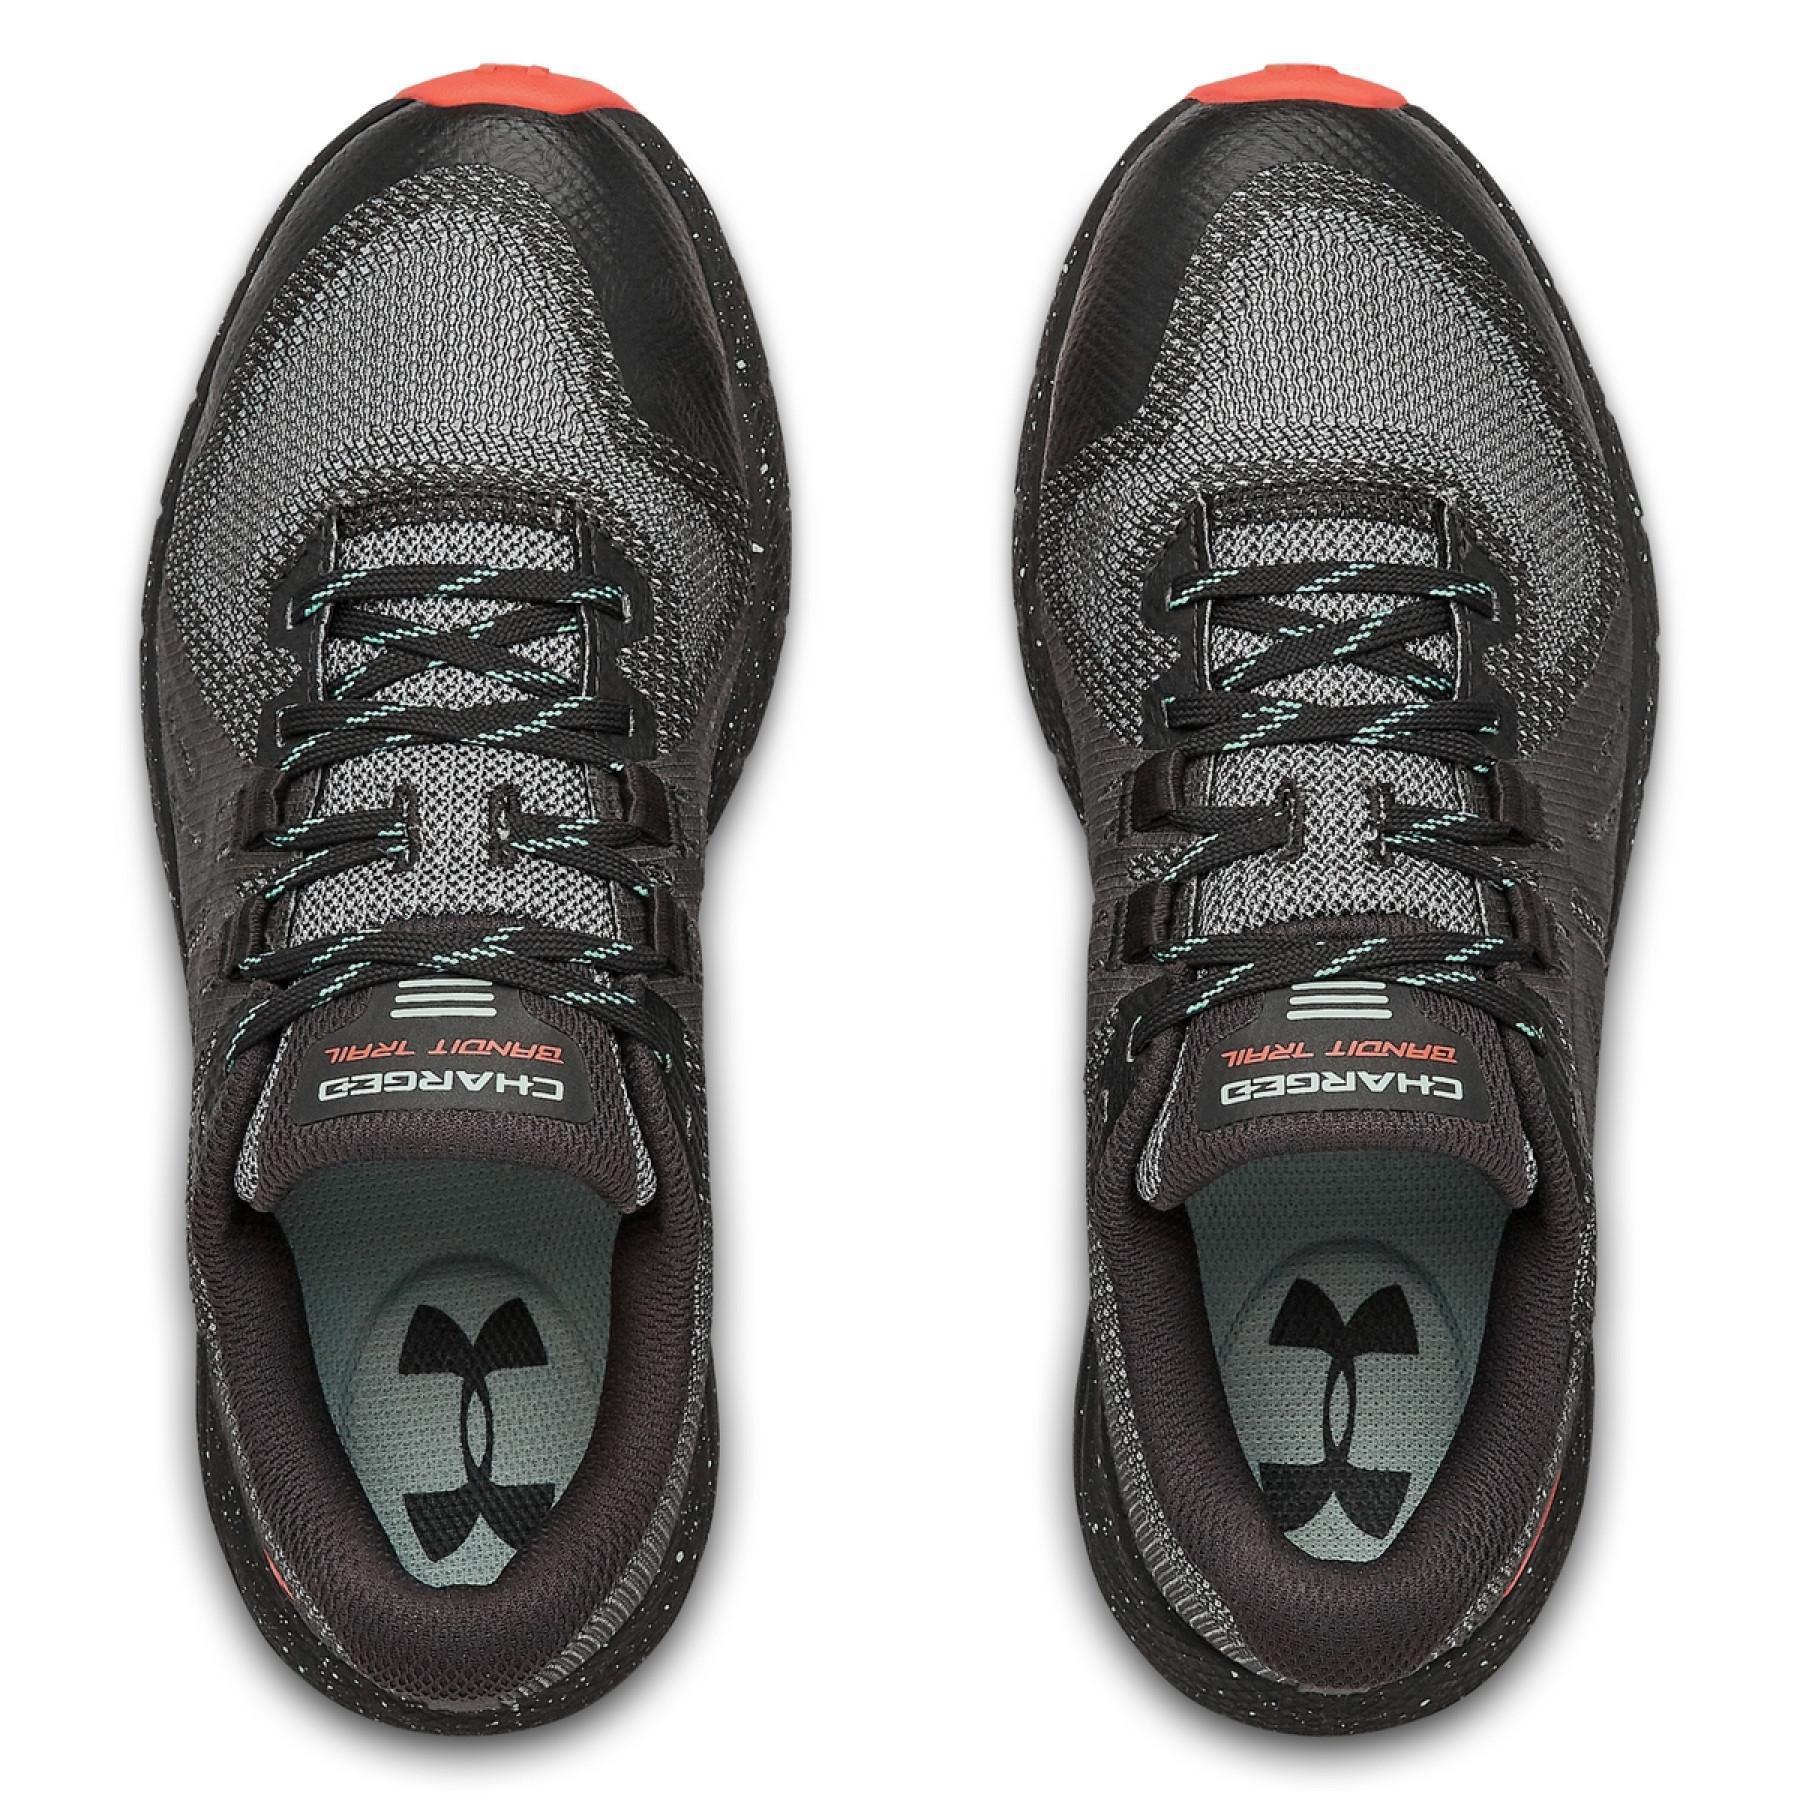 Zapatillas de running para mujer Under Armour Charged Bandit Trail Gore-Tex